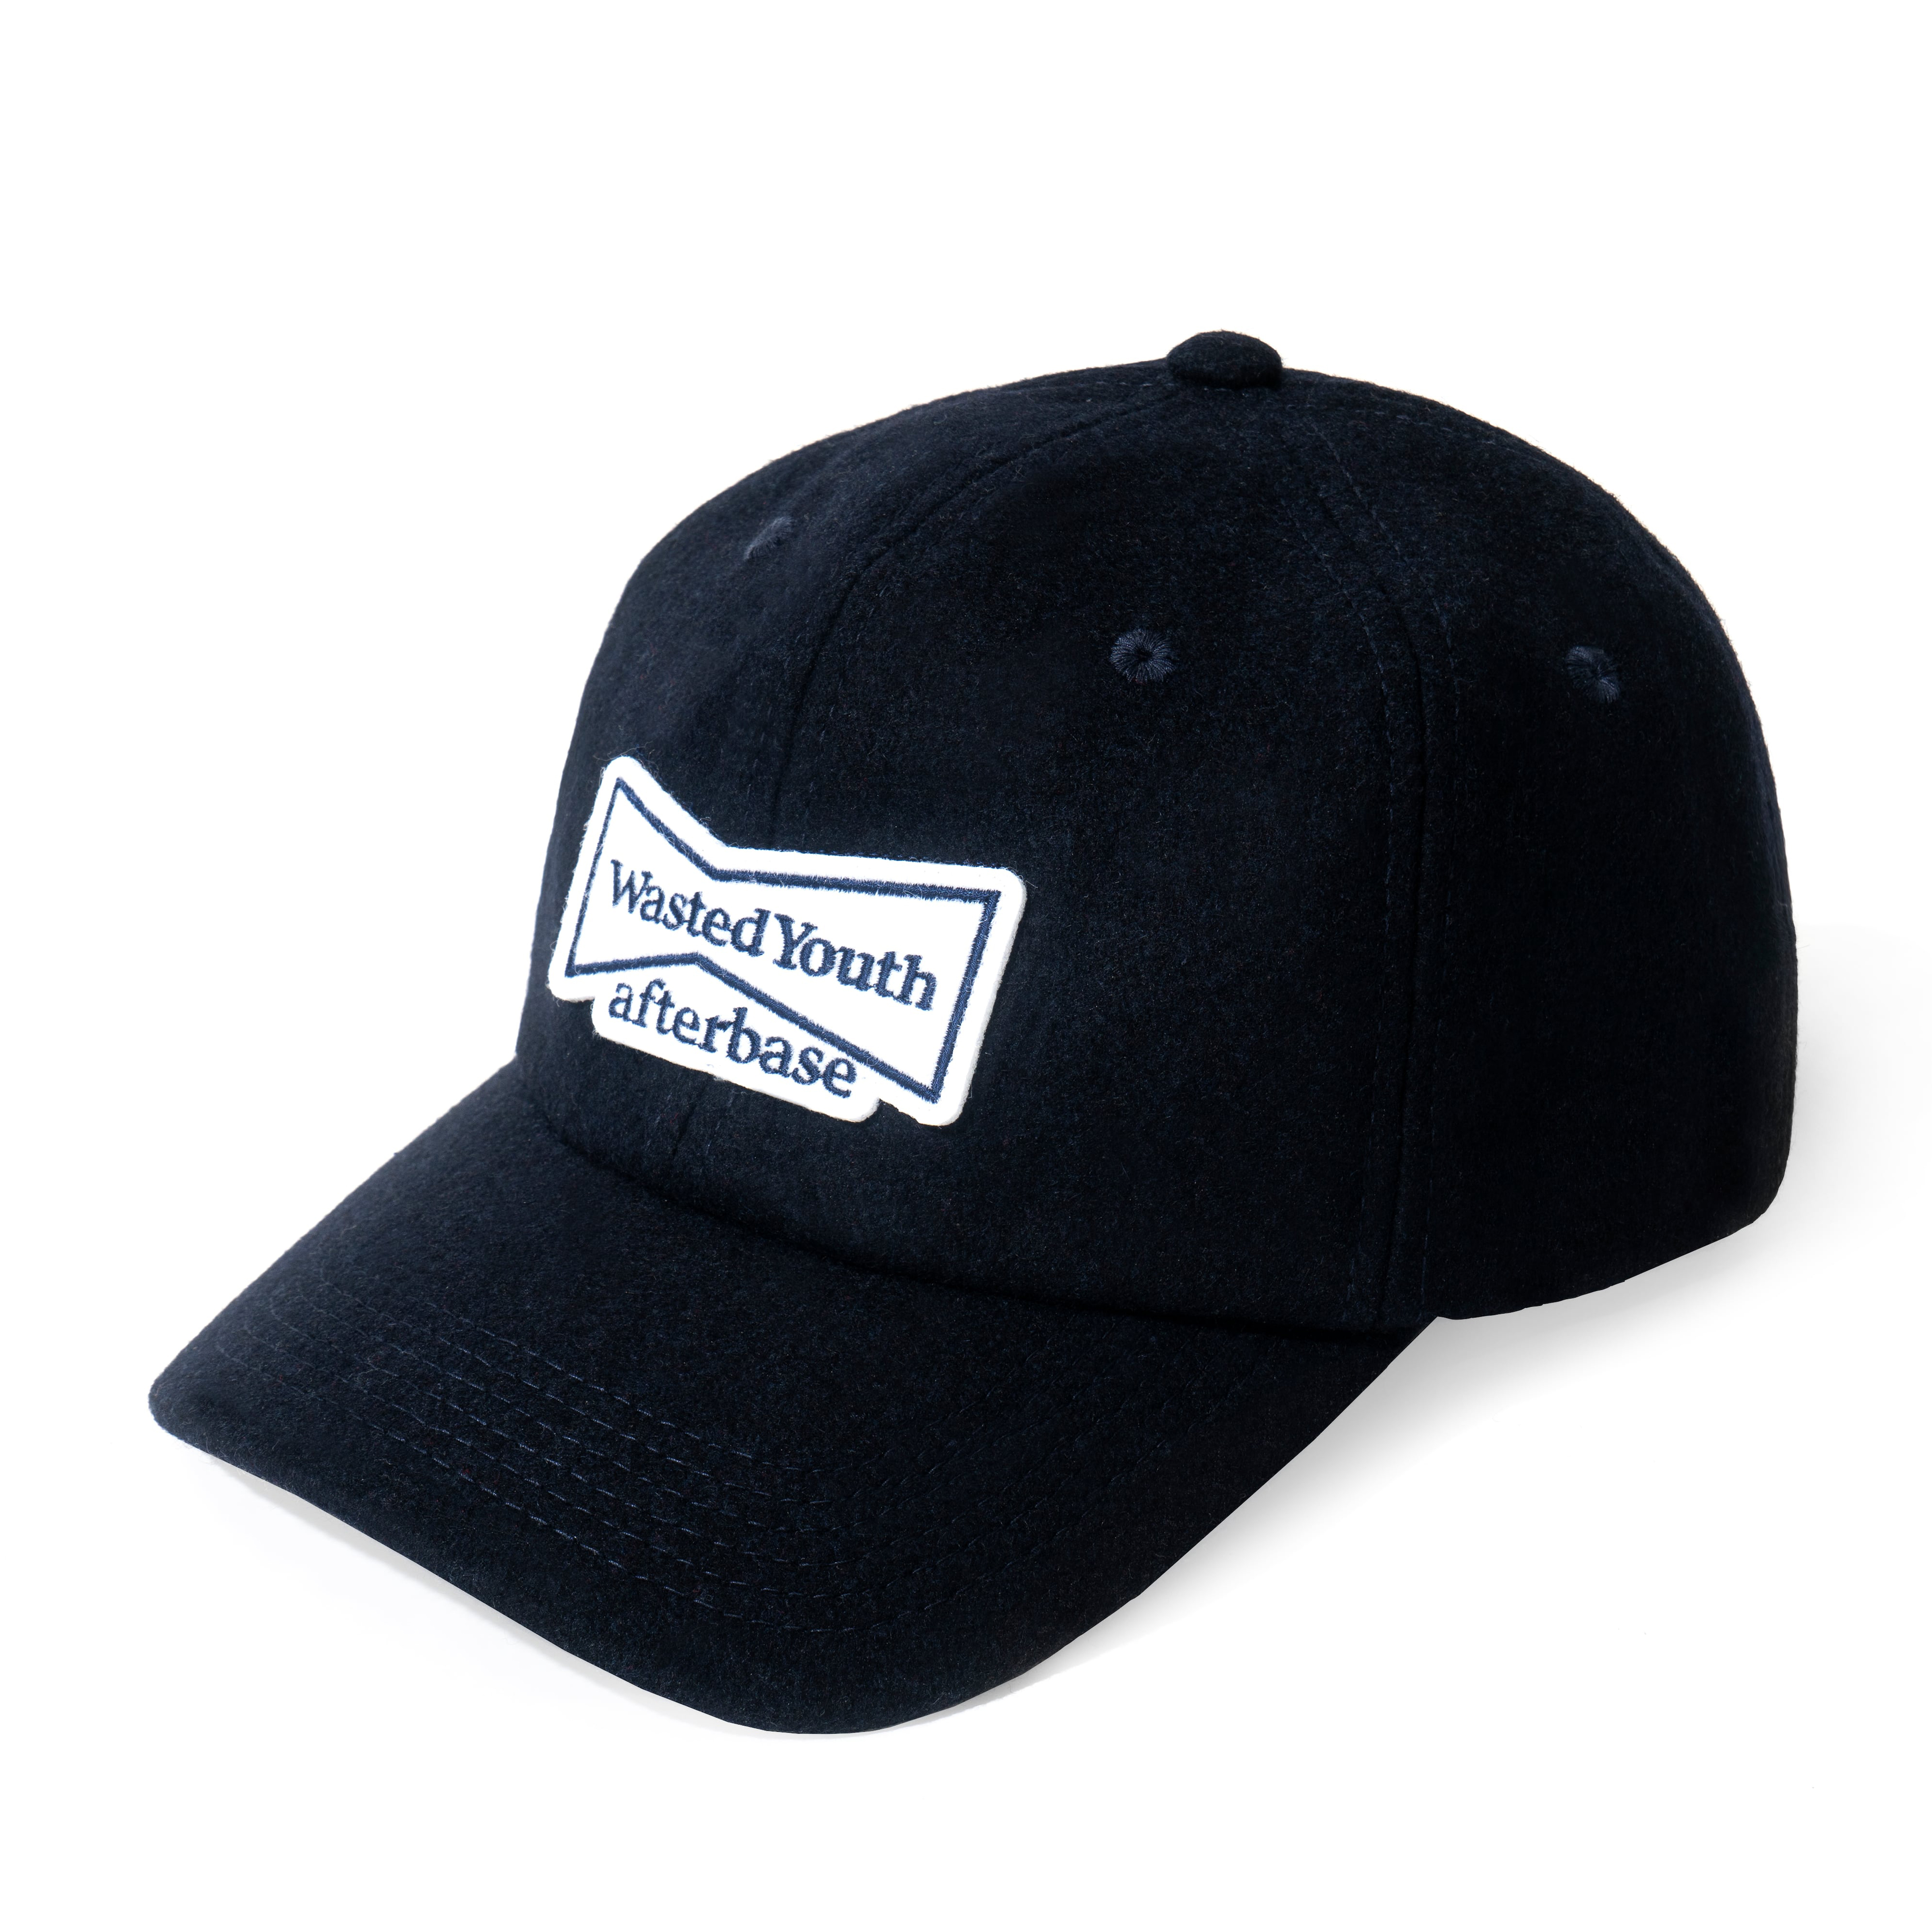 Wasted Youth afterbase キャップ | hartwellspremium.com